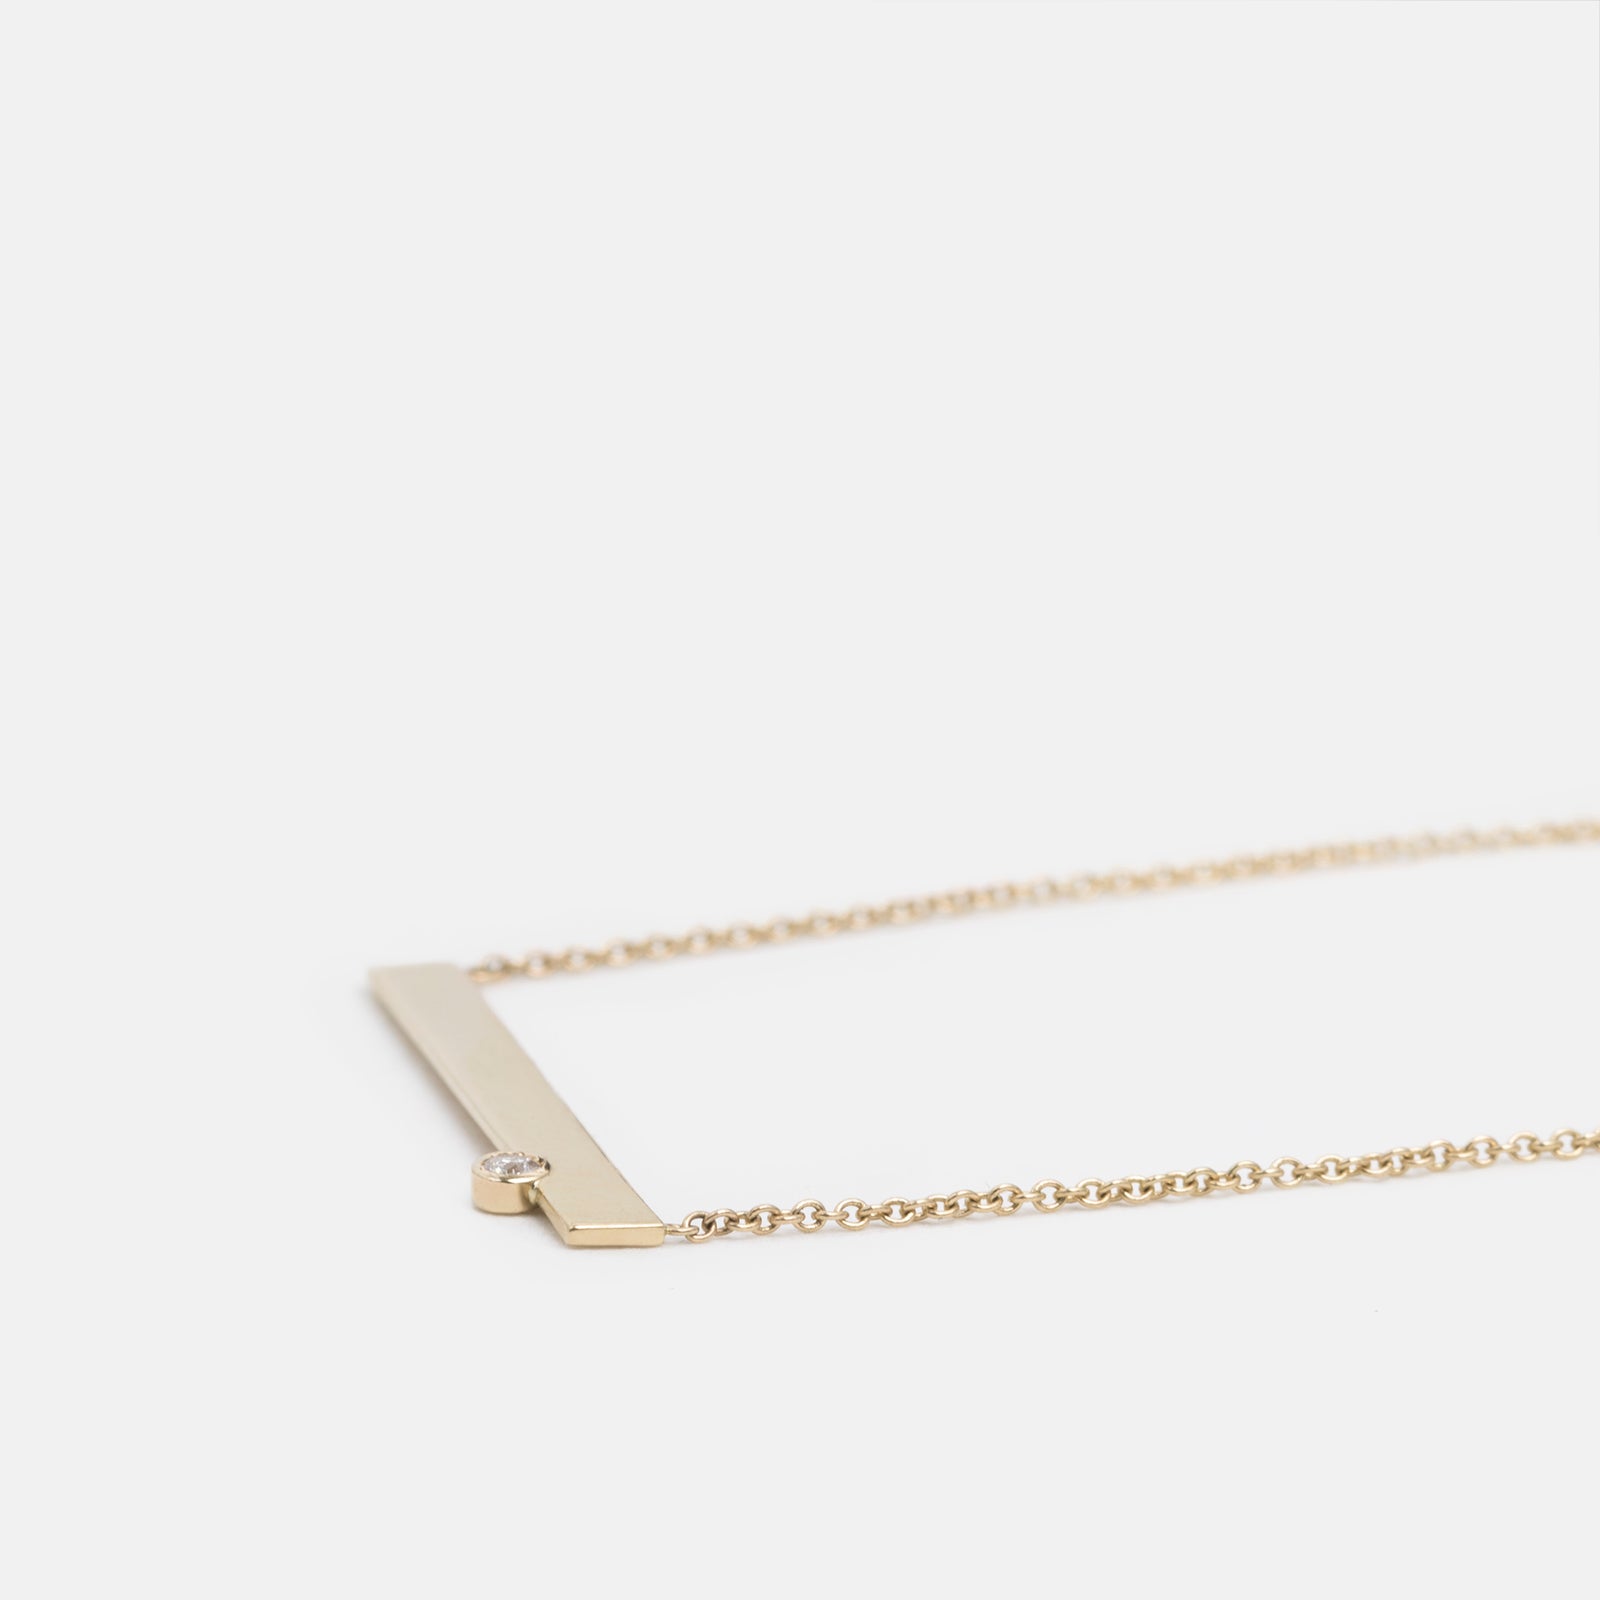 Lane Cool Necklace in 14k Gold set with White Diamond By SHW Fine Jewelry NYC